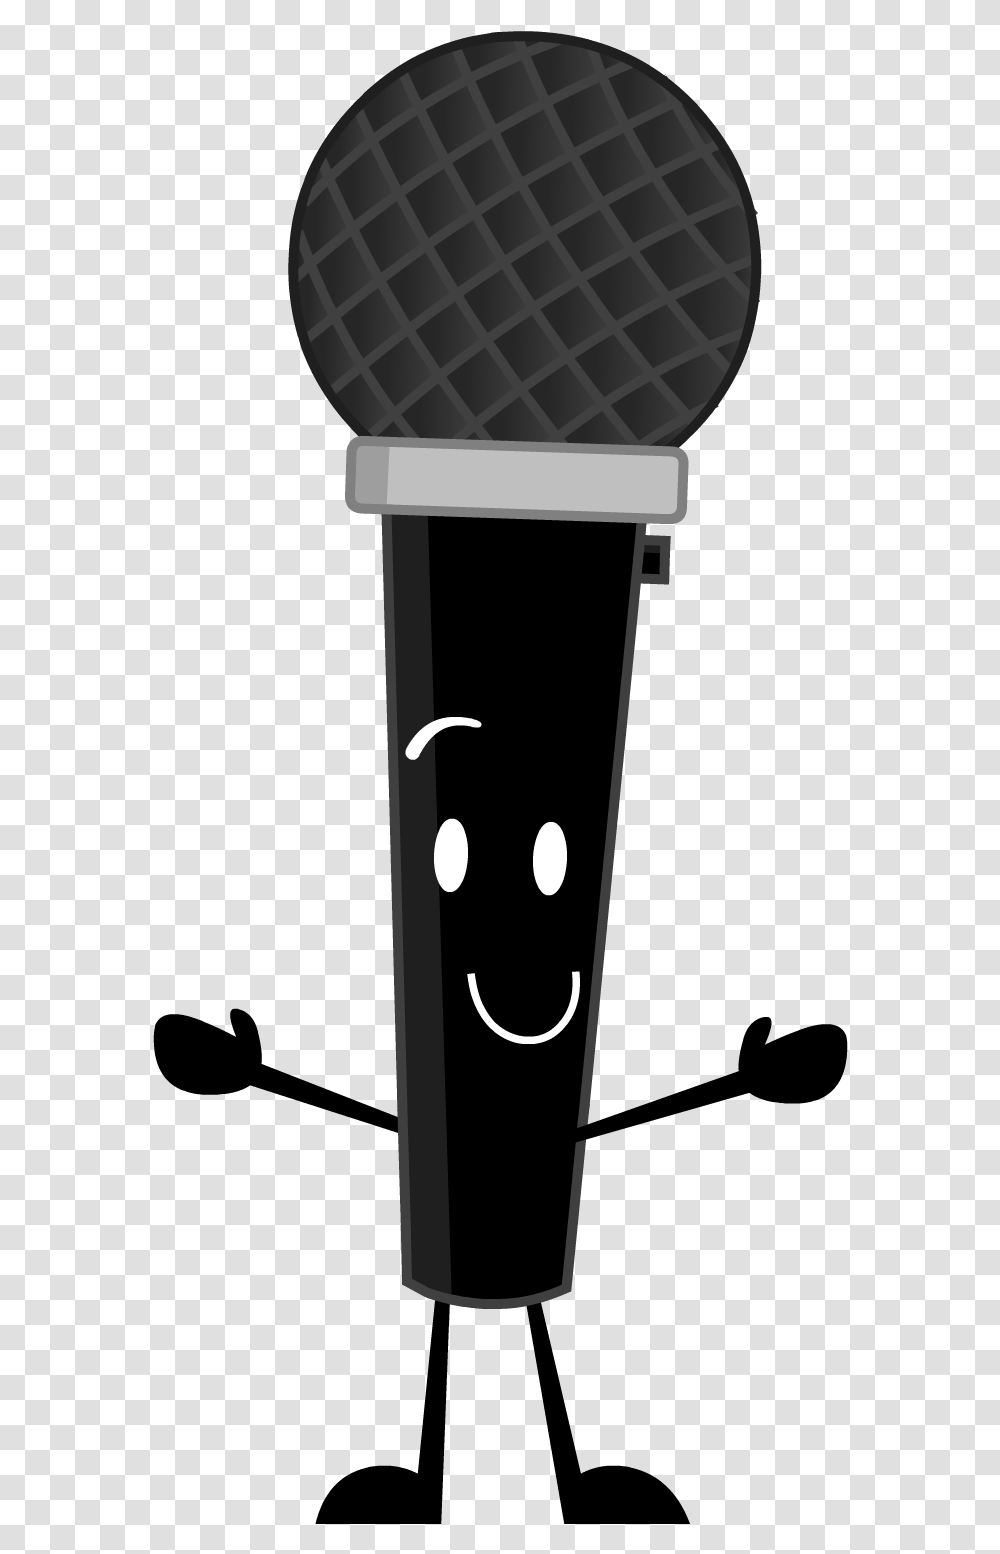 Object Oppose Wiki Object Oppose Microphone, People, Building, Leisure Activities, Light Transparent Png